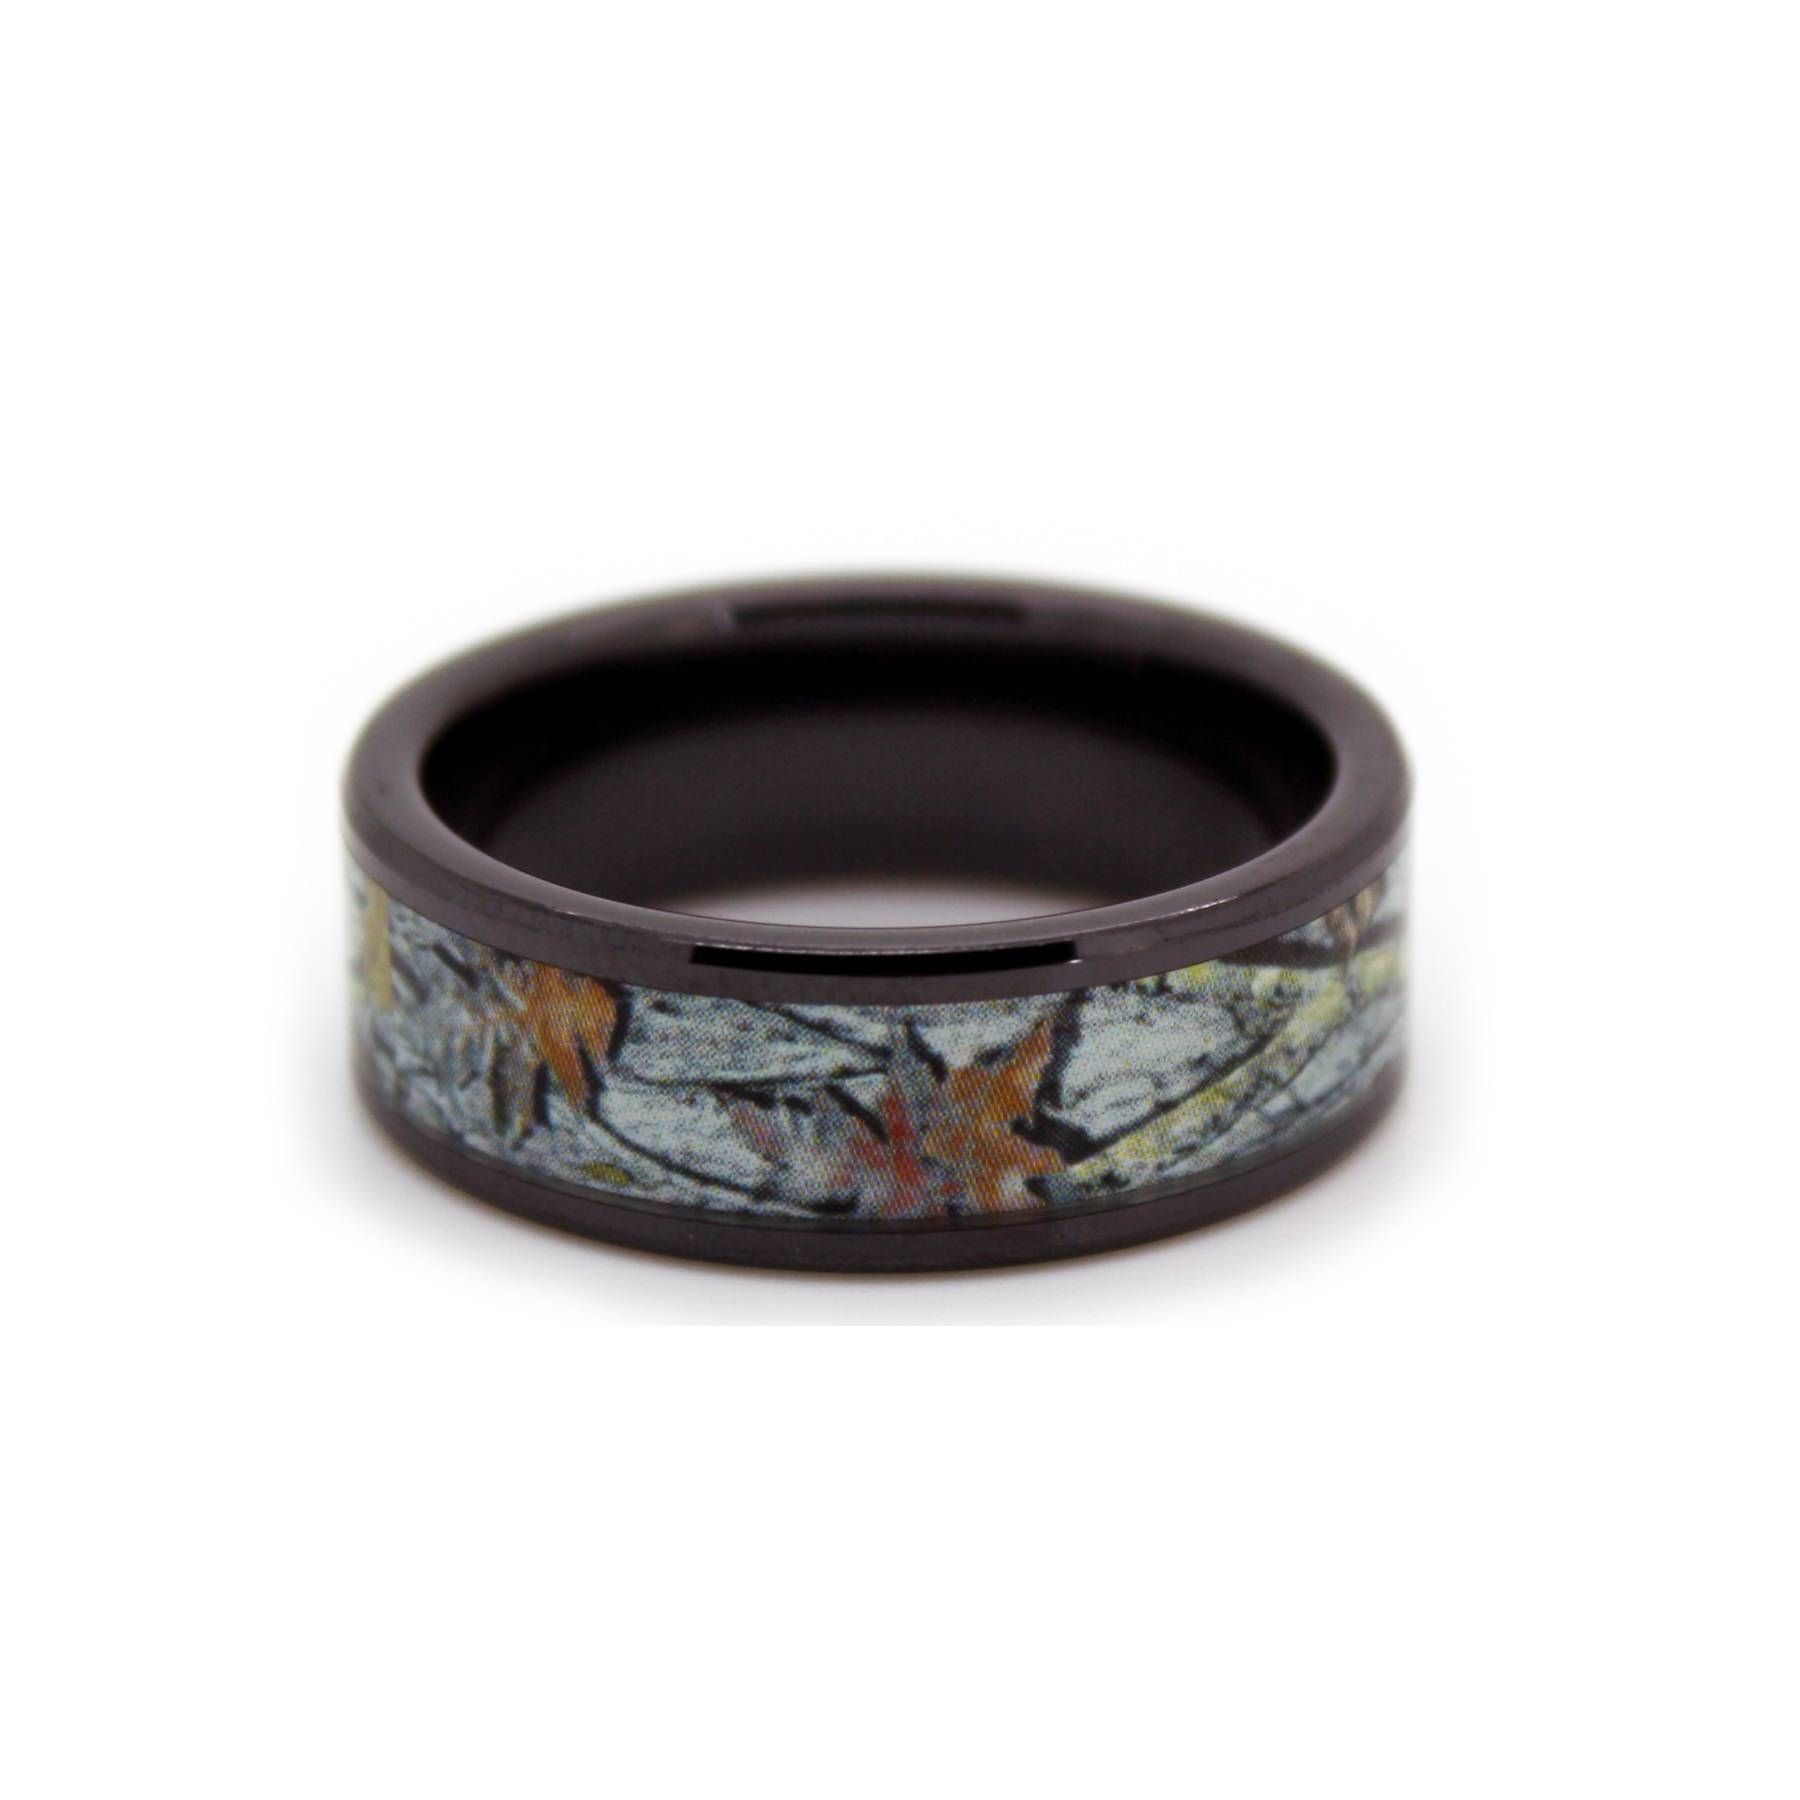 Electrician Rings – Camouflage Wedding Rings For $99 From #1 Camo Throughout Wedding Bands For Electrician (View 8 of 15)